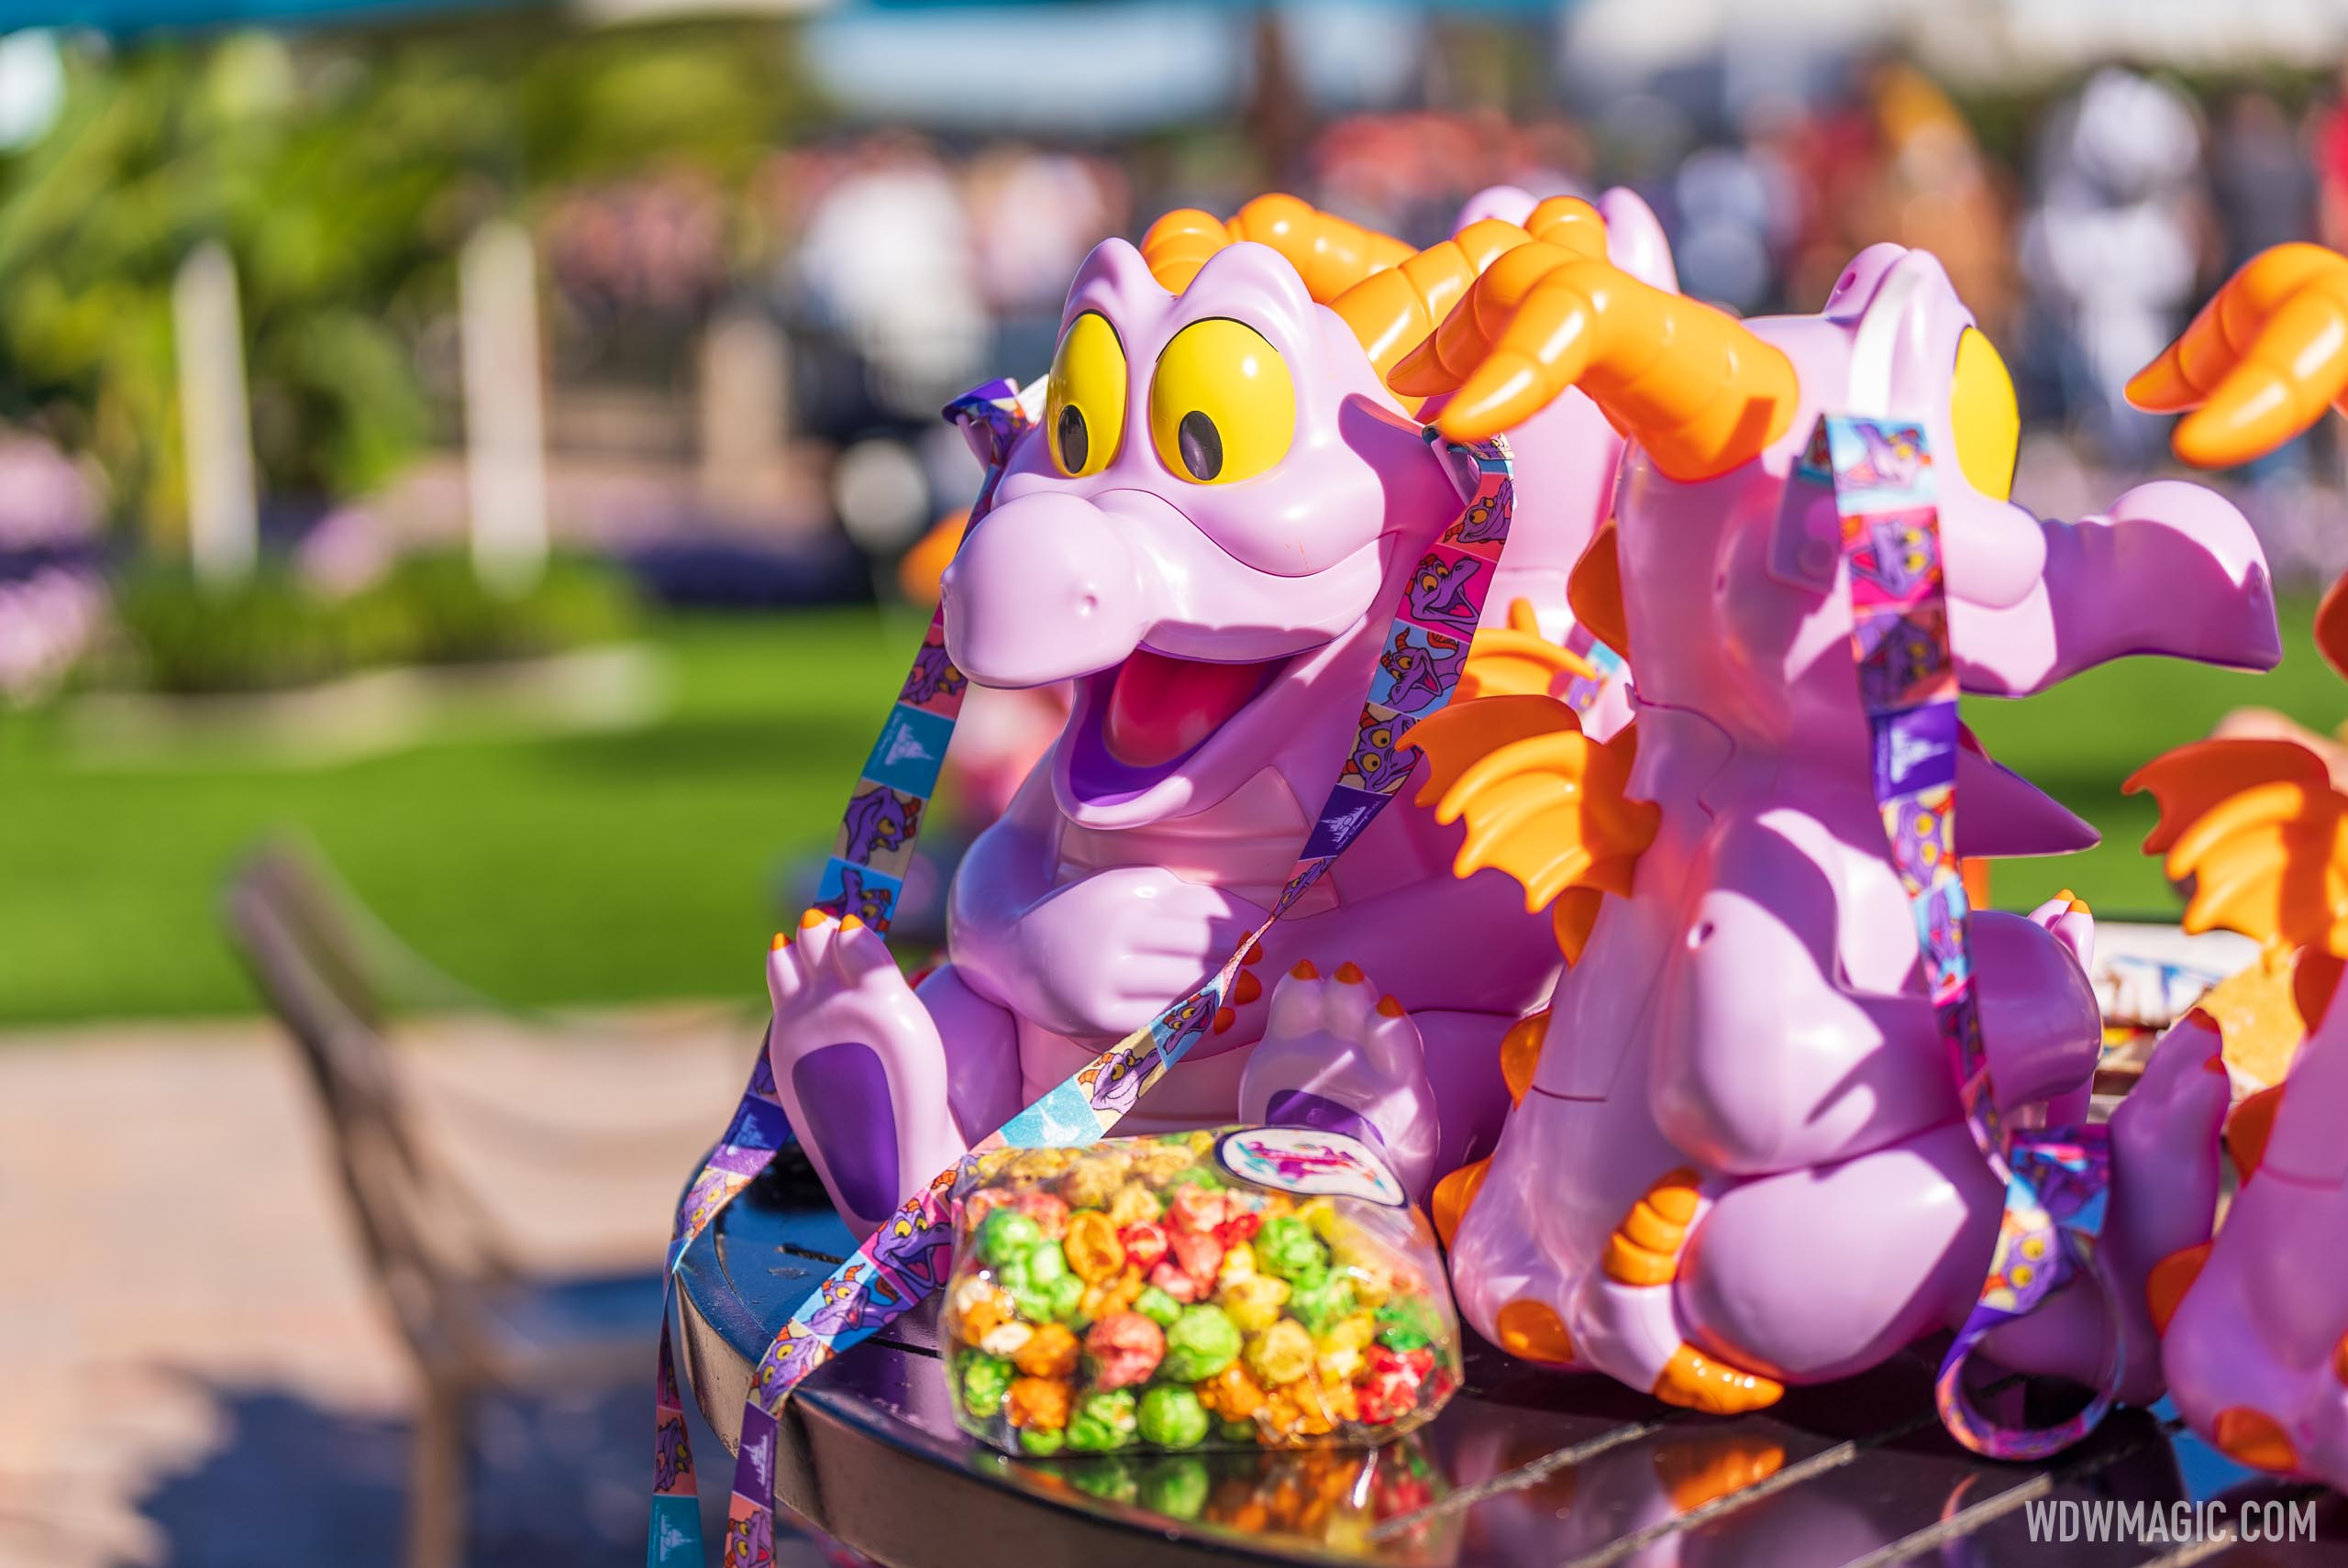 EPCOT Festival of the Arts Figment popcorn bucket frenzy is over... for now